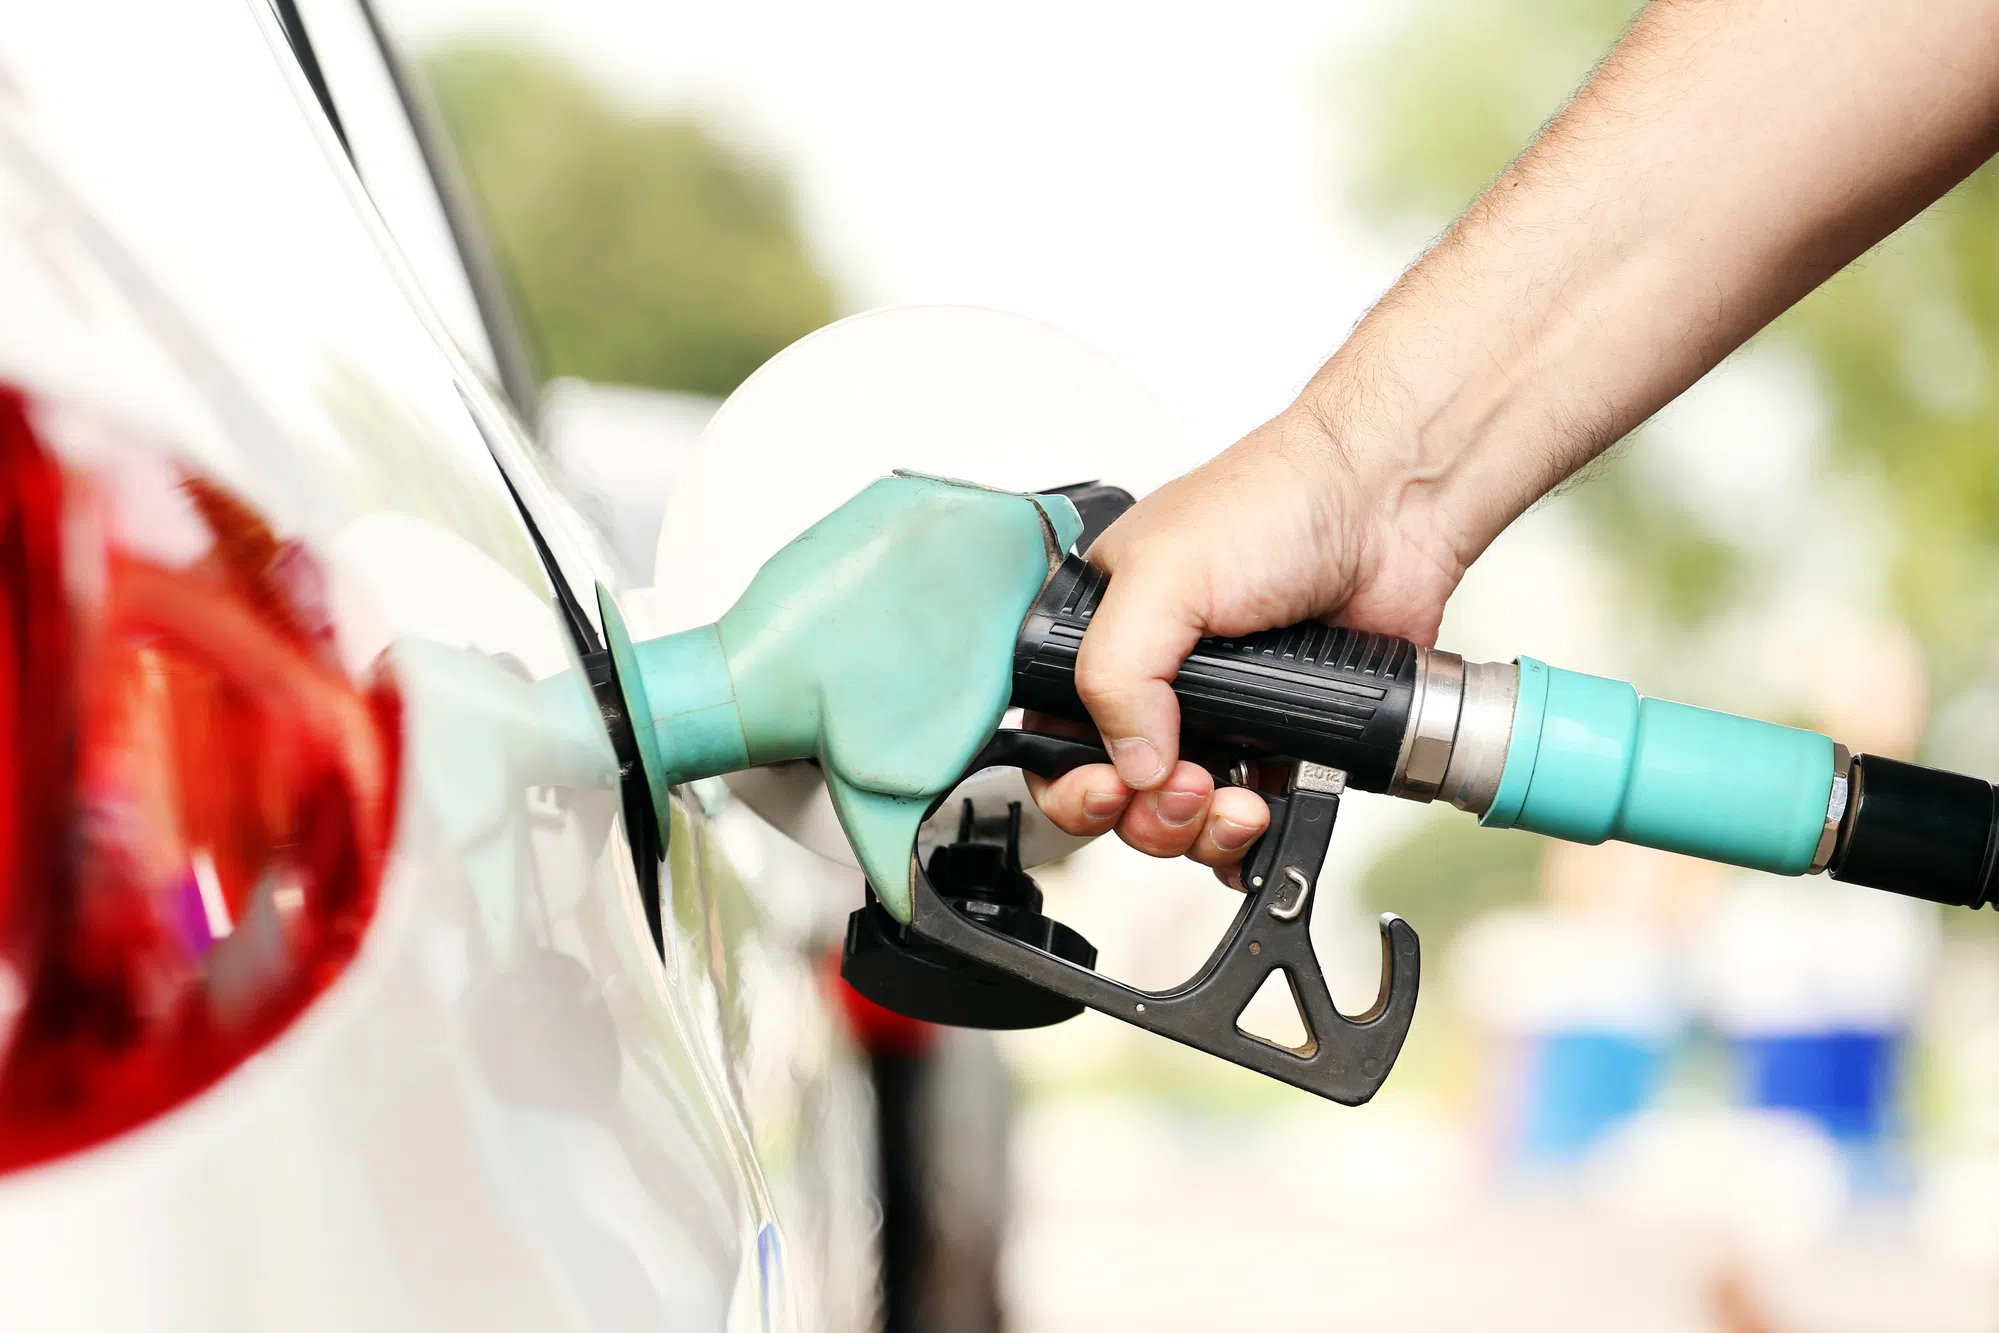 Fuel prices expected to increase this week